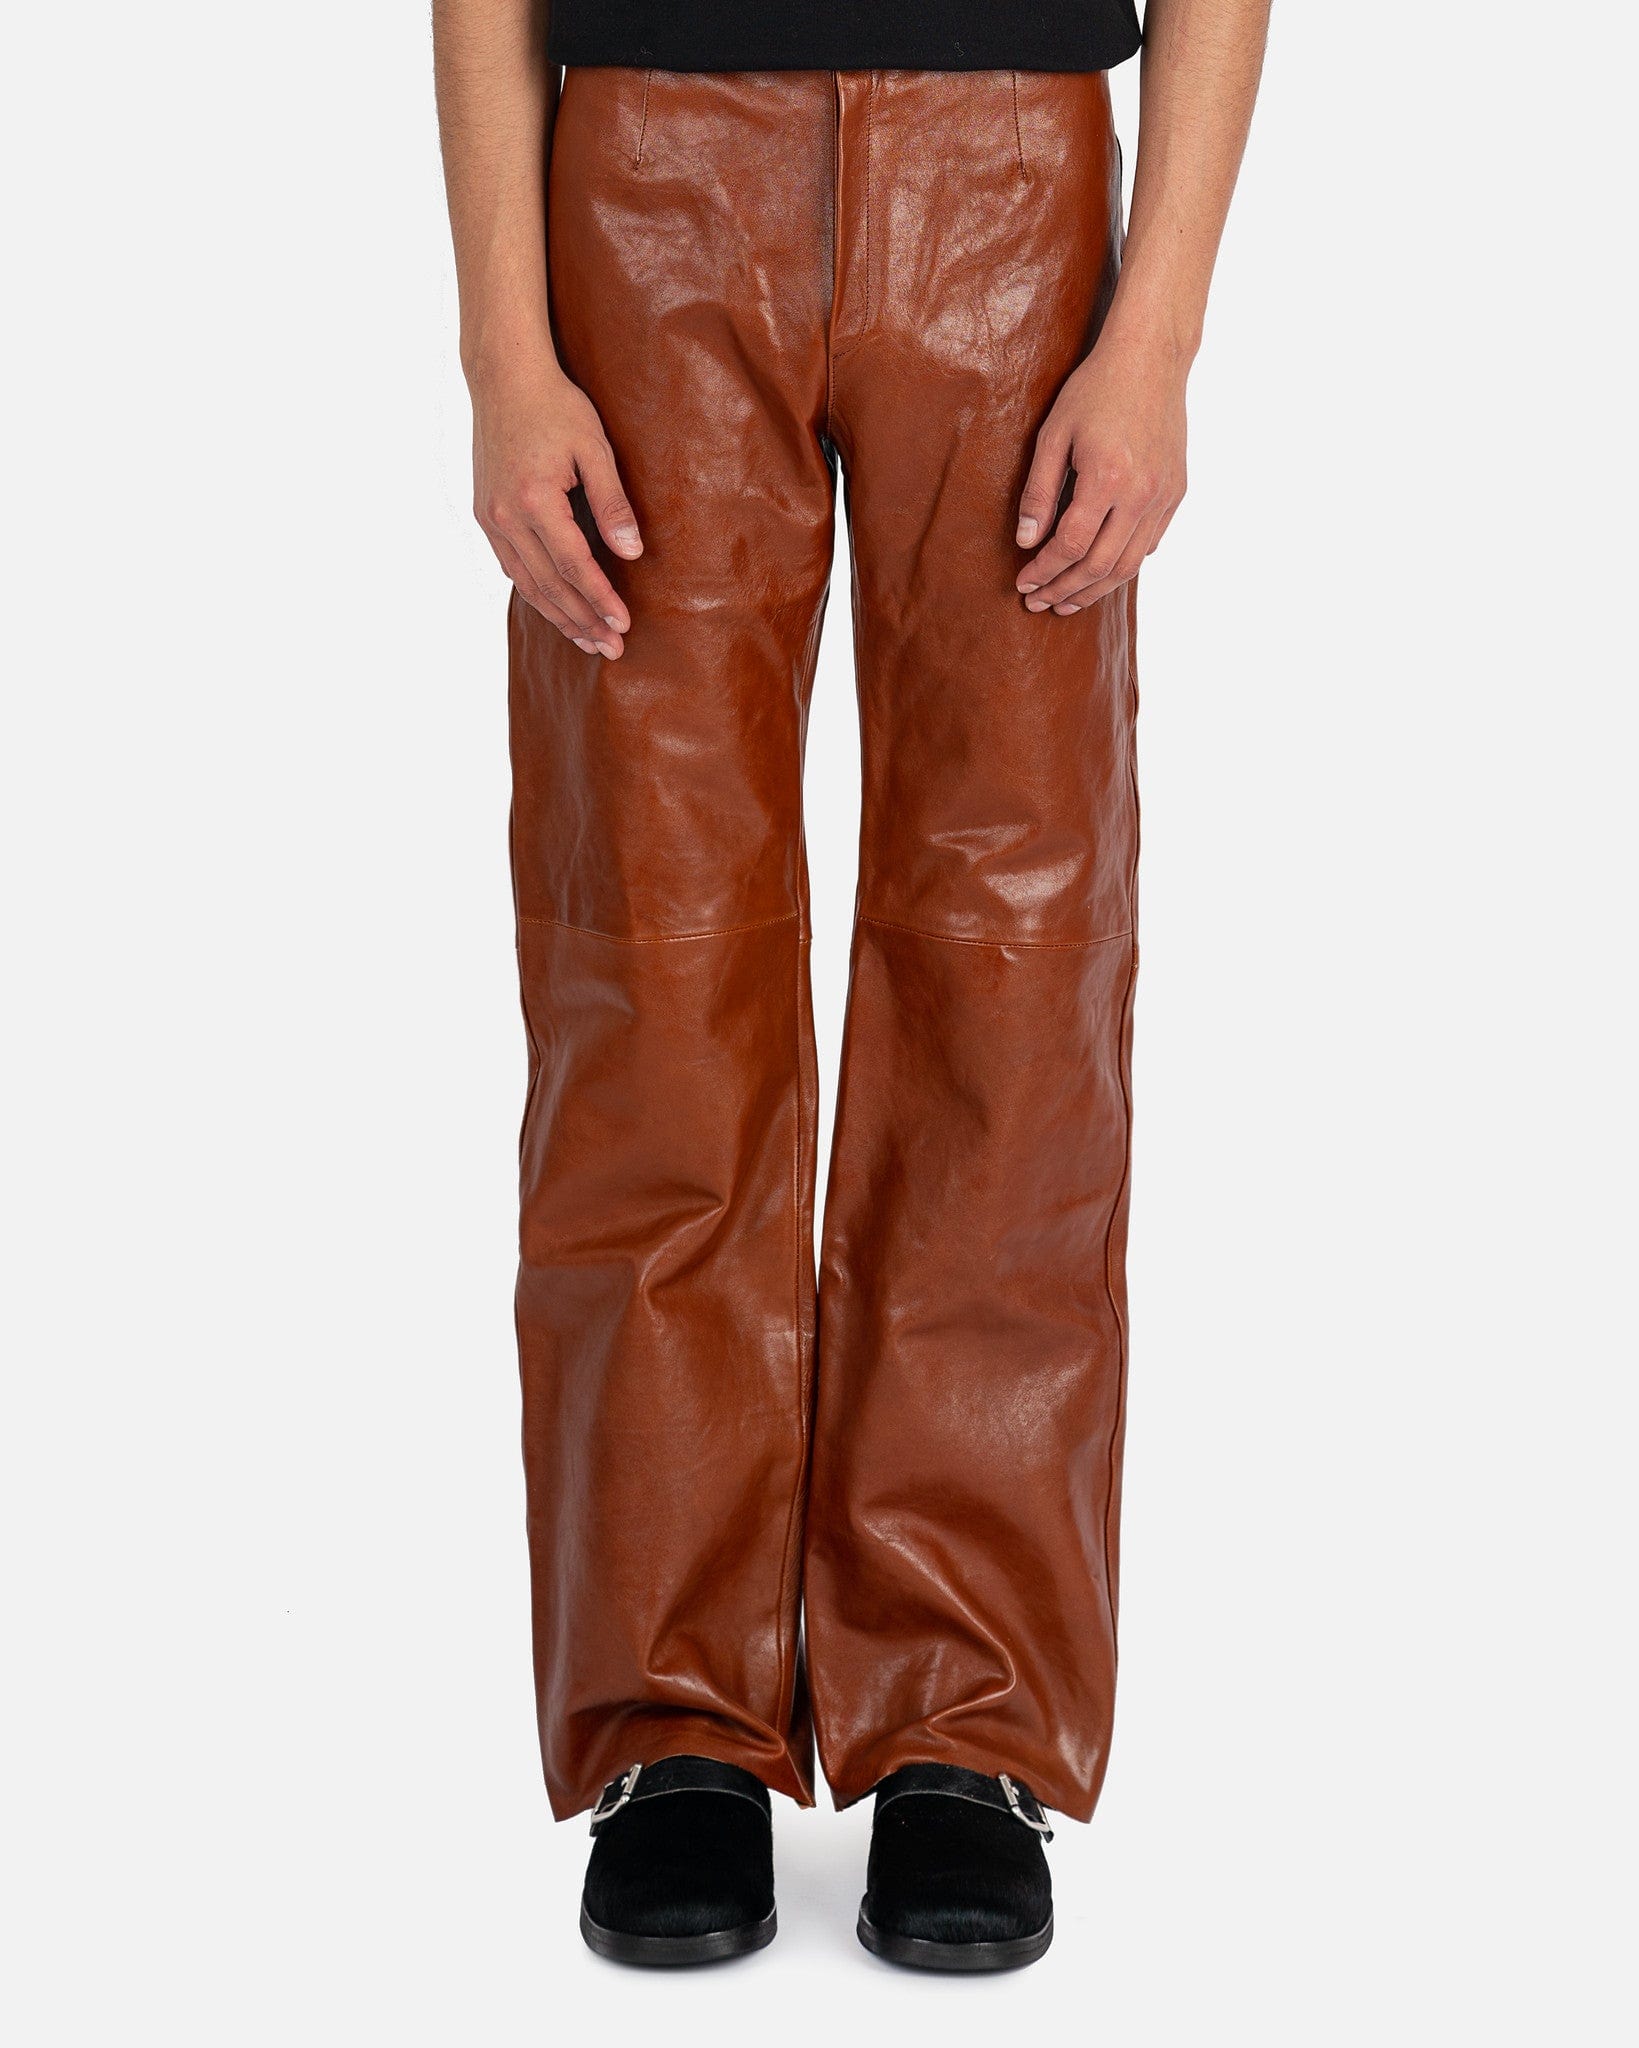 Our Legacy Men's Pants Biker Trousers in Cognac Brown Leather